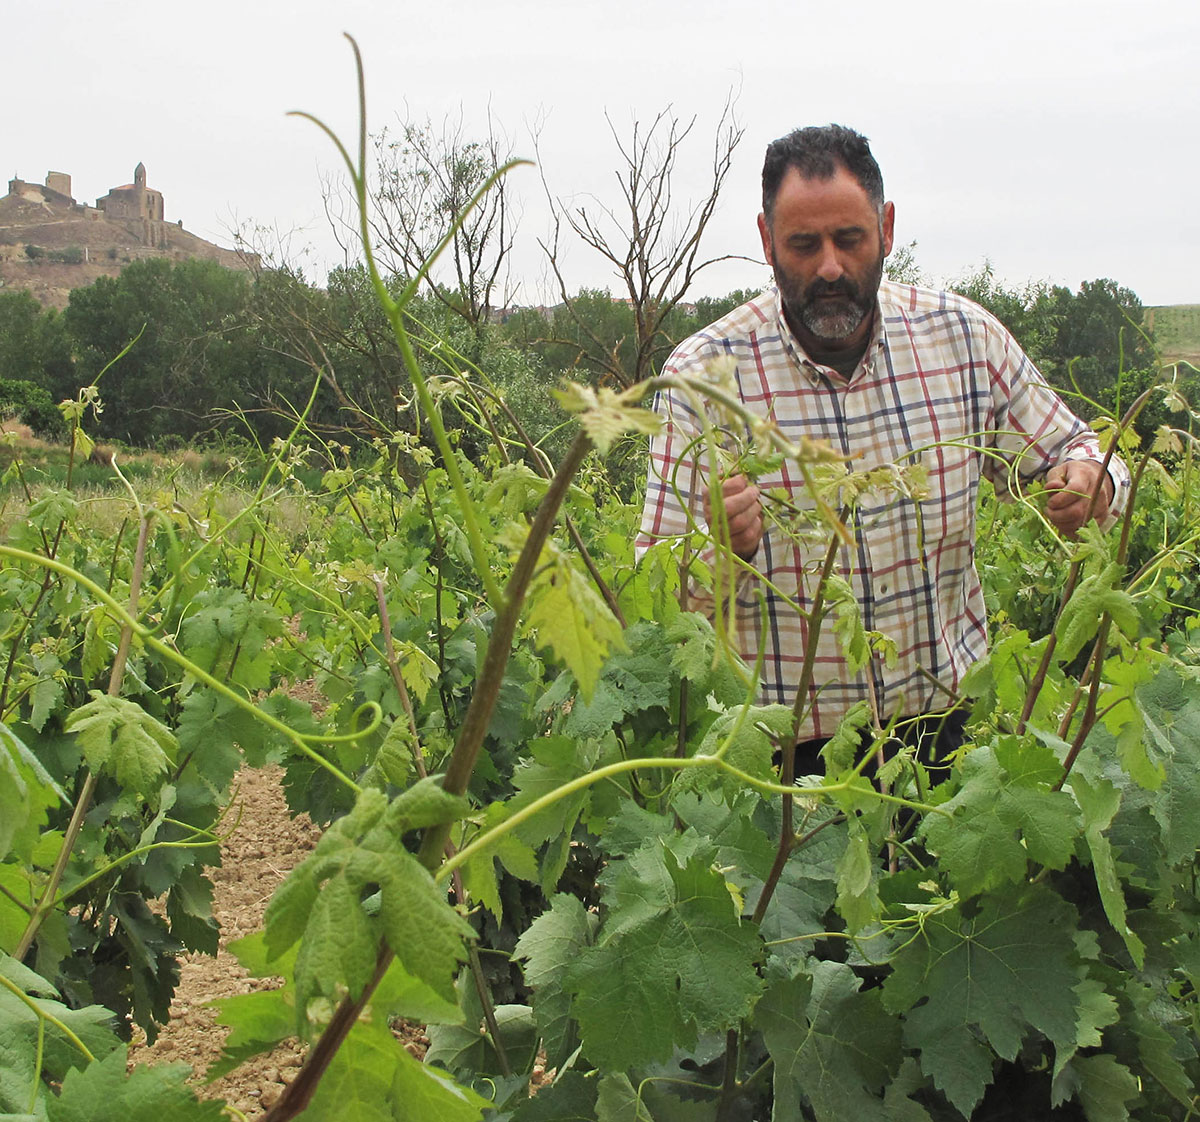 Winemaker and viticulturist, Abel Mendoza, examines vine shoots in one of his vineyards in Rioja, Spain.